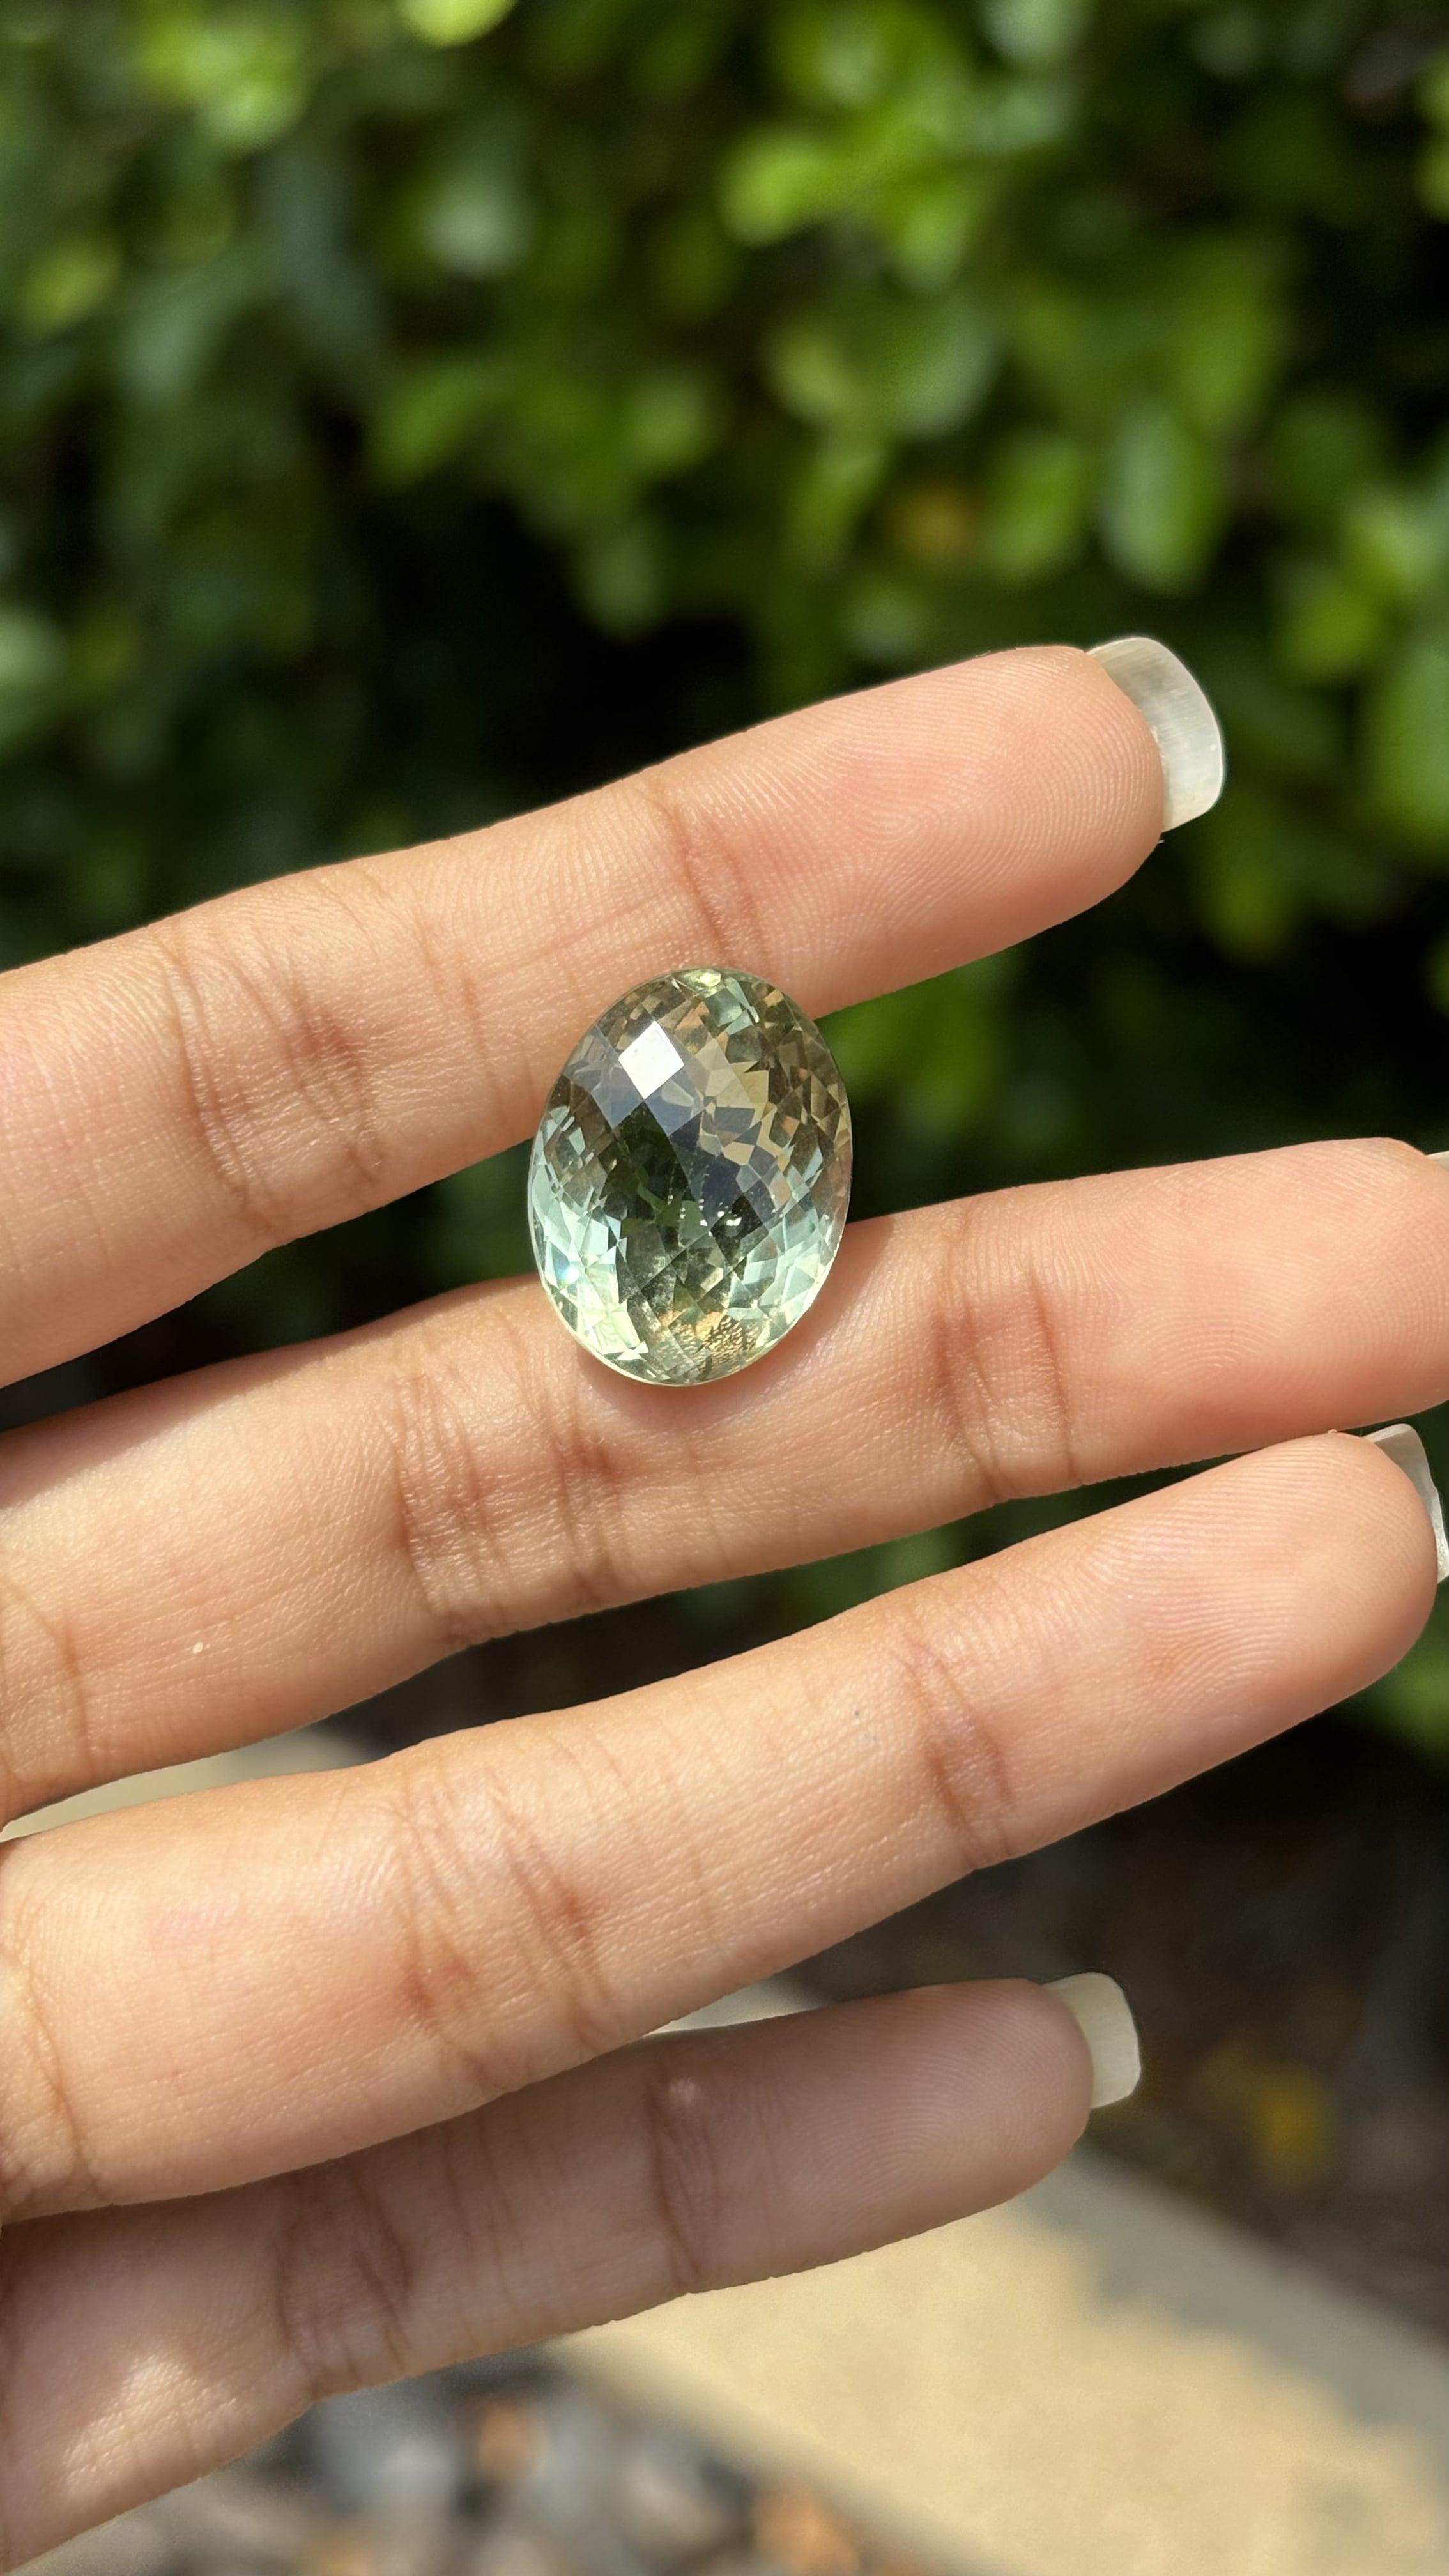 A gorgeous 17.01 Carat Quartz gemstone. It is completely natural and it is a clean stone.  The quartz has a unique and breath-taking  green color that is sure to allure you at first sight! It is cut to perfection in a distinct and fancy oval